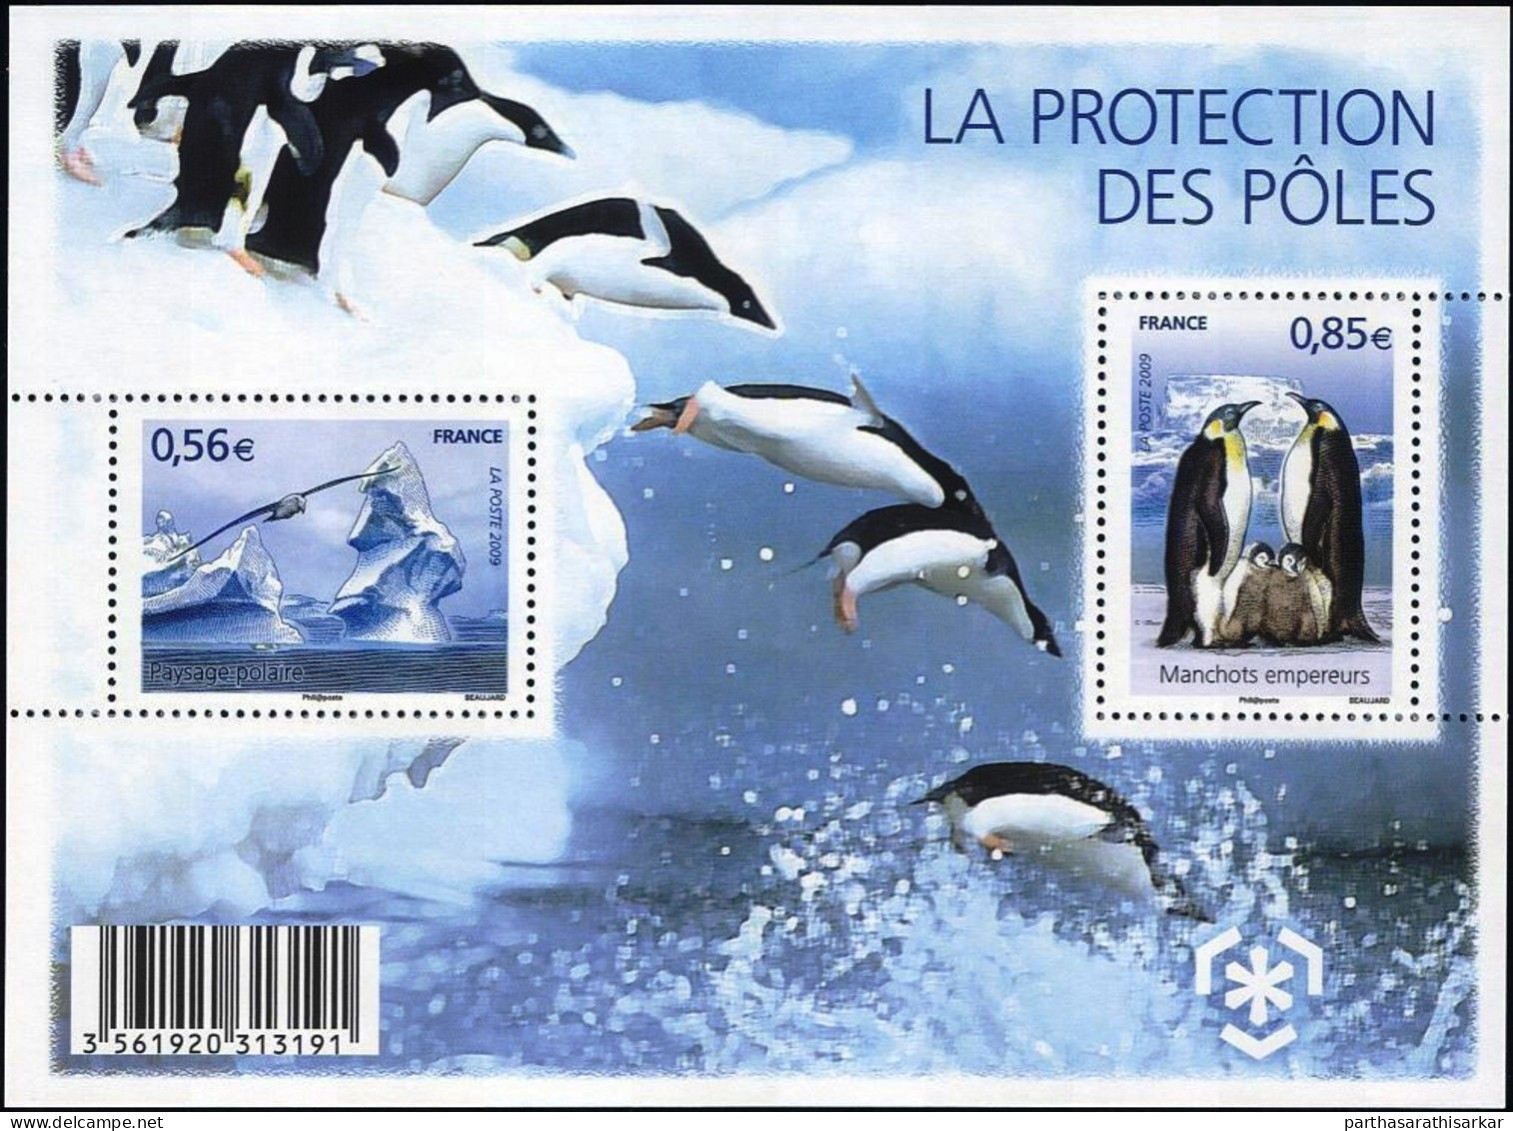 FRANCE 2009 PROTECTION OF THE POLAR REGIONS MINIATURE SHEET MS MNH - Année Polaire Internationale